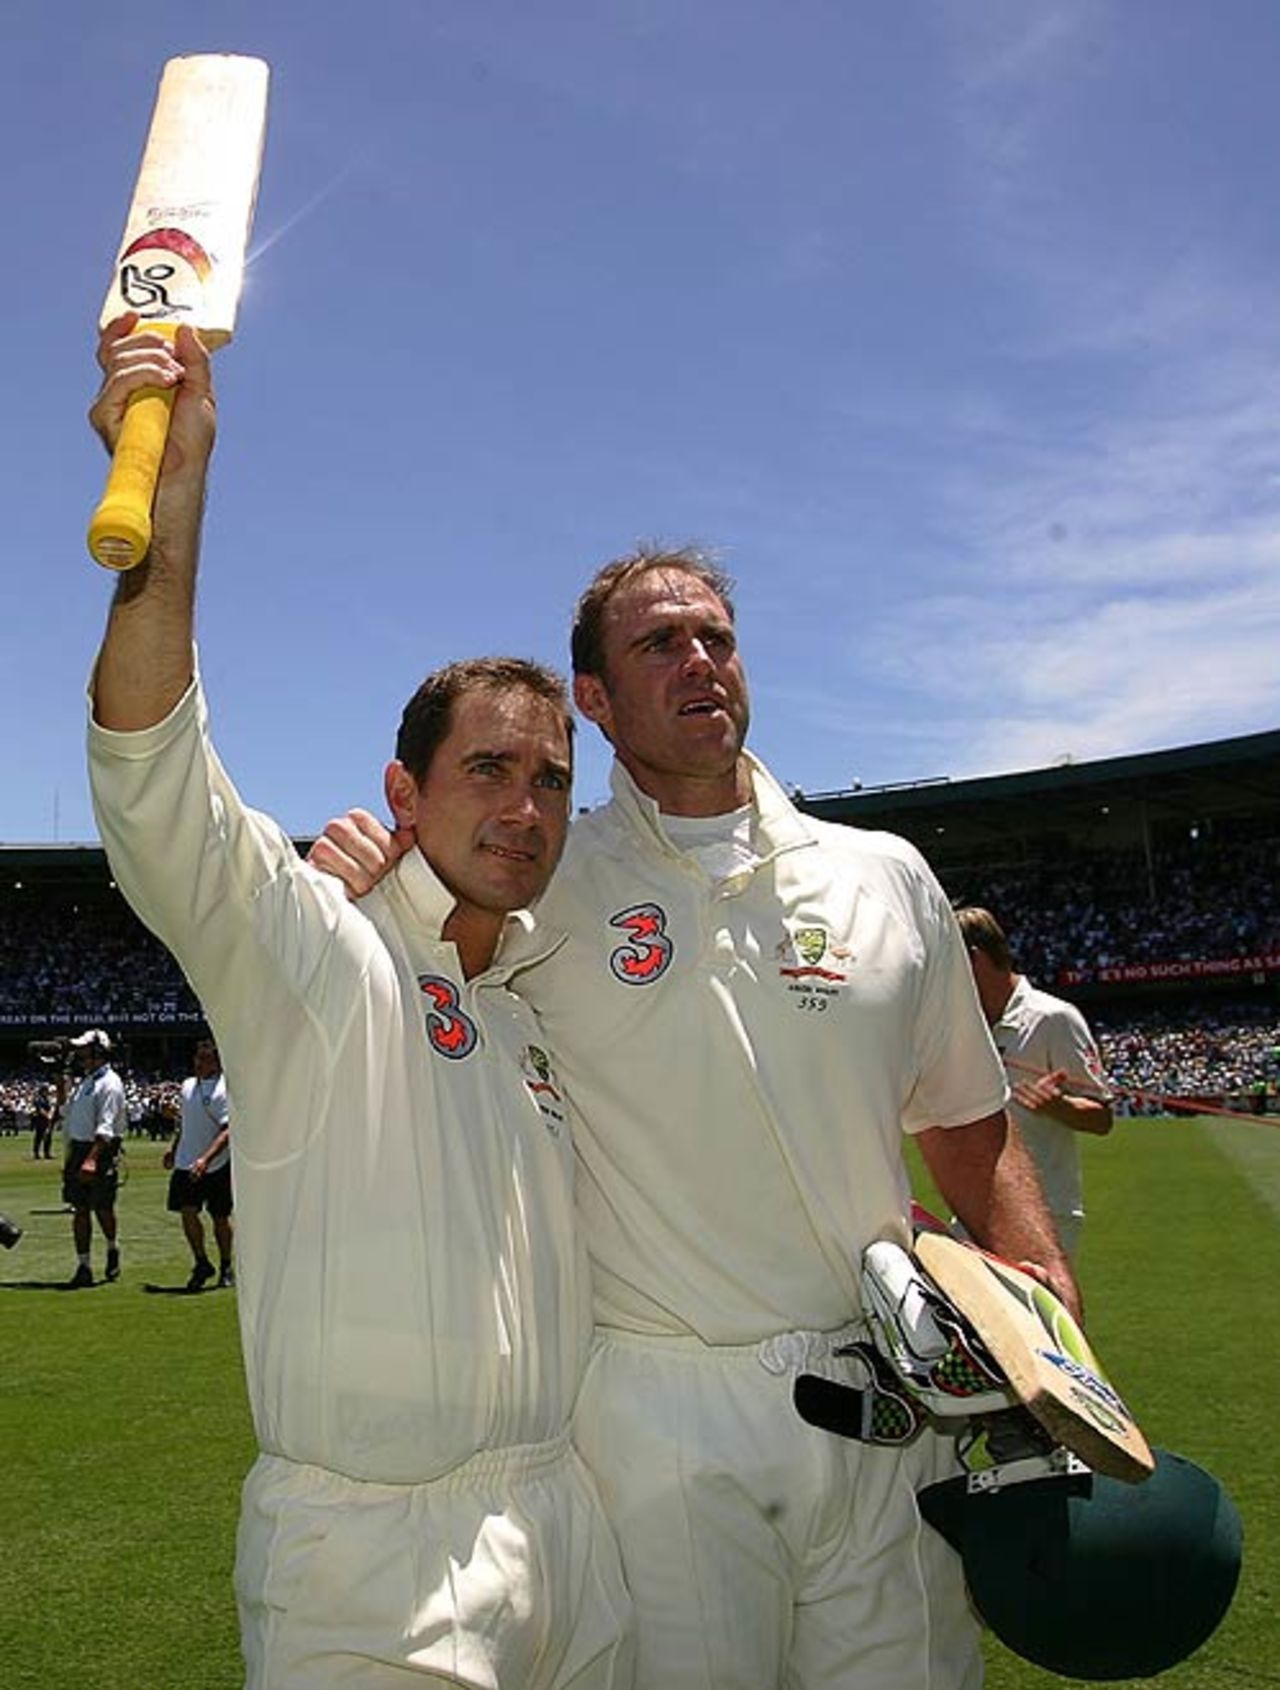 Justin Langer and Matthew Hayden salute the crowd together for the last time, Australia v England, 5th Test, Sydney, January 5, 2007